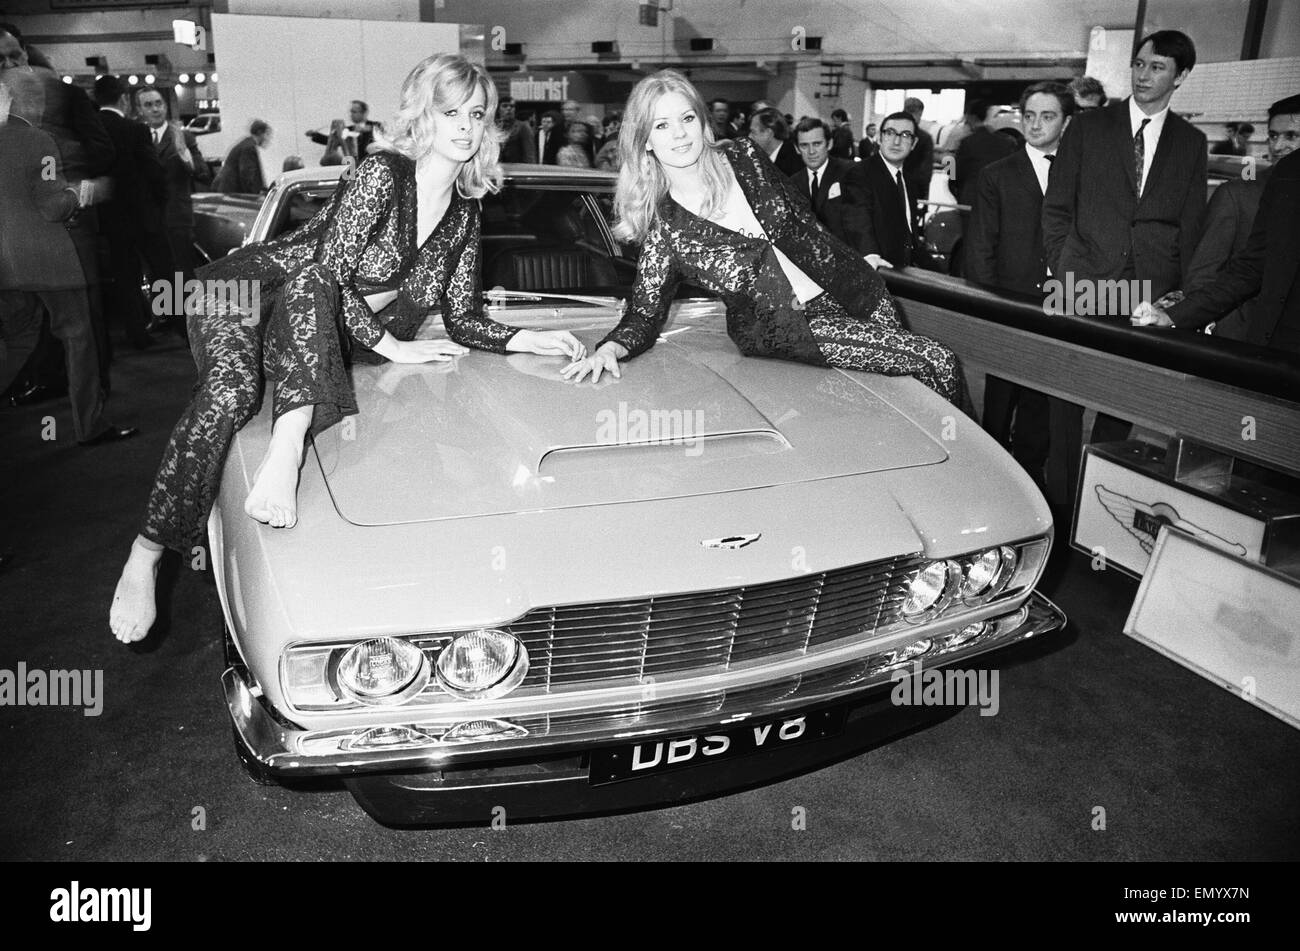 Models drapped over the bonnet of an Aston Martin DBS V8 at the 1969 Motor Show on 1st June 1969. 